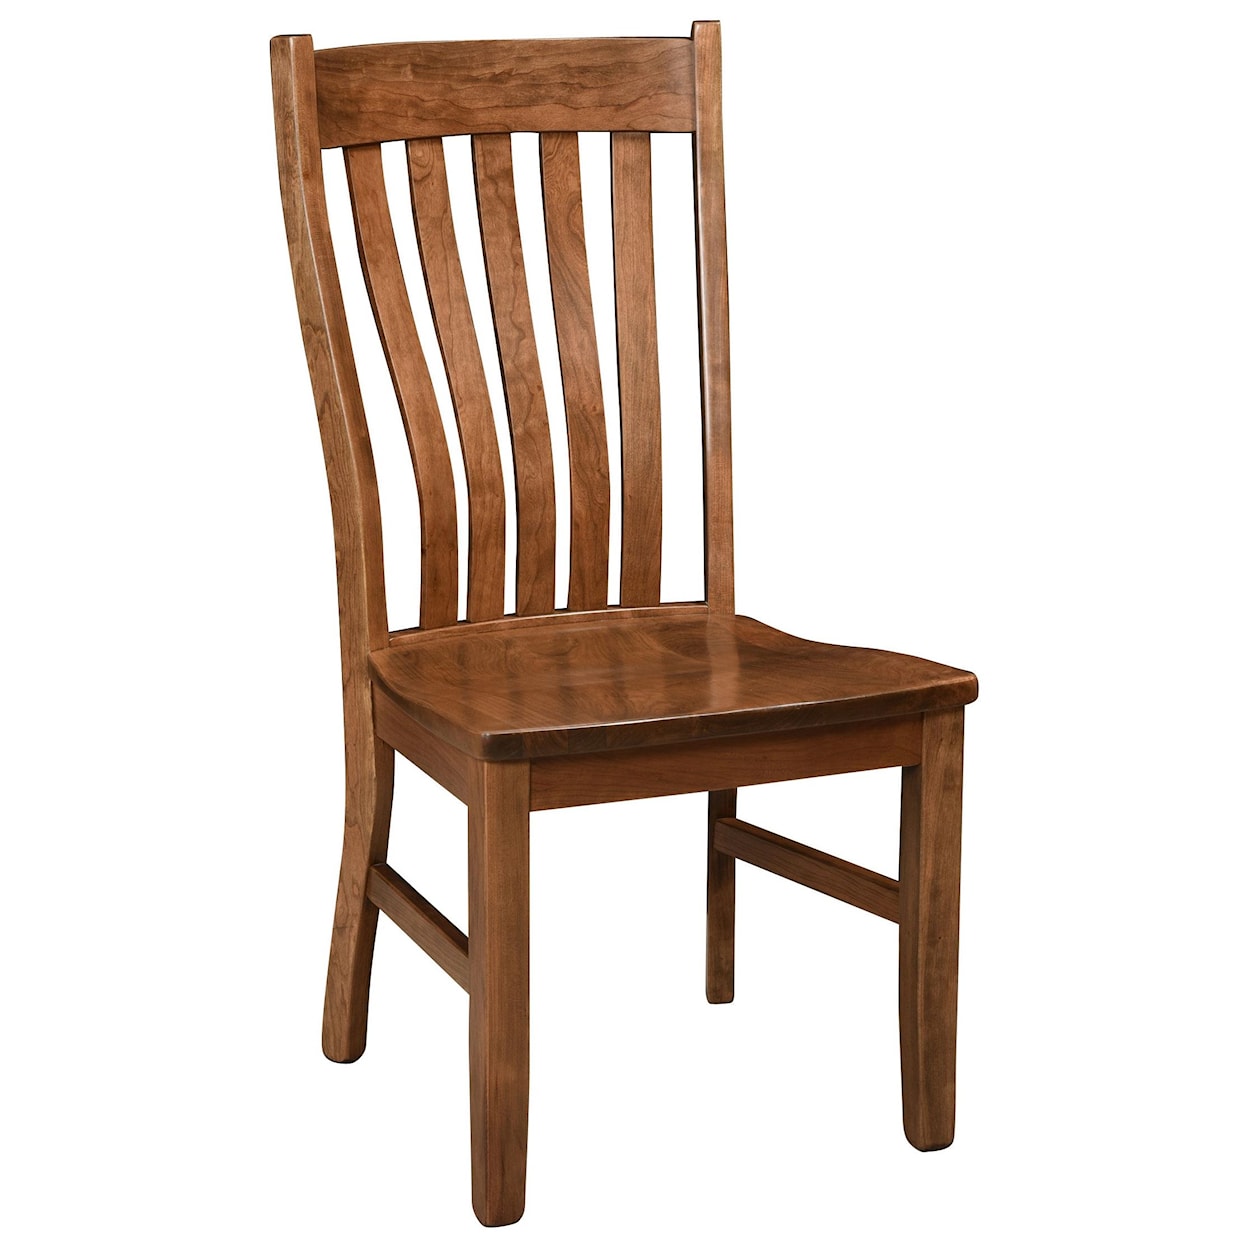 Wengerd Wood Products Rockpoint Side Chair